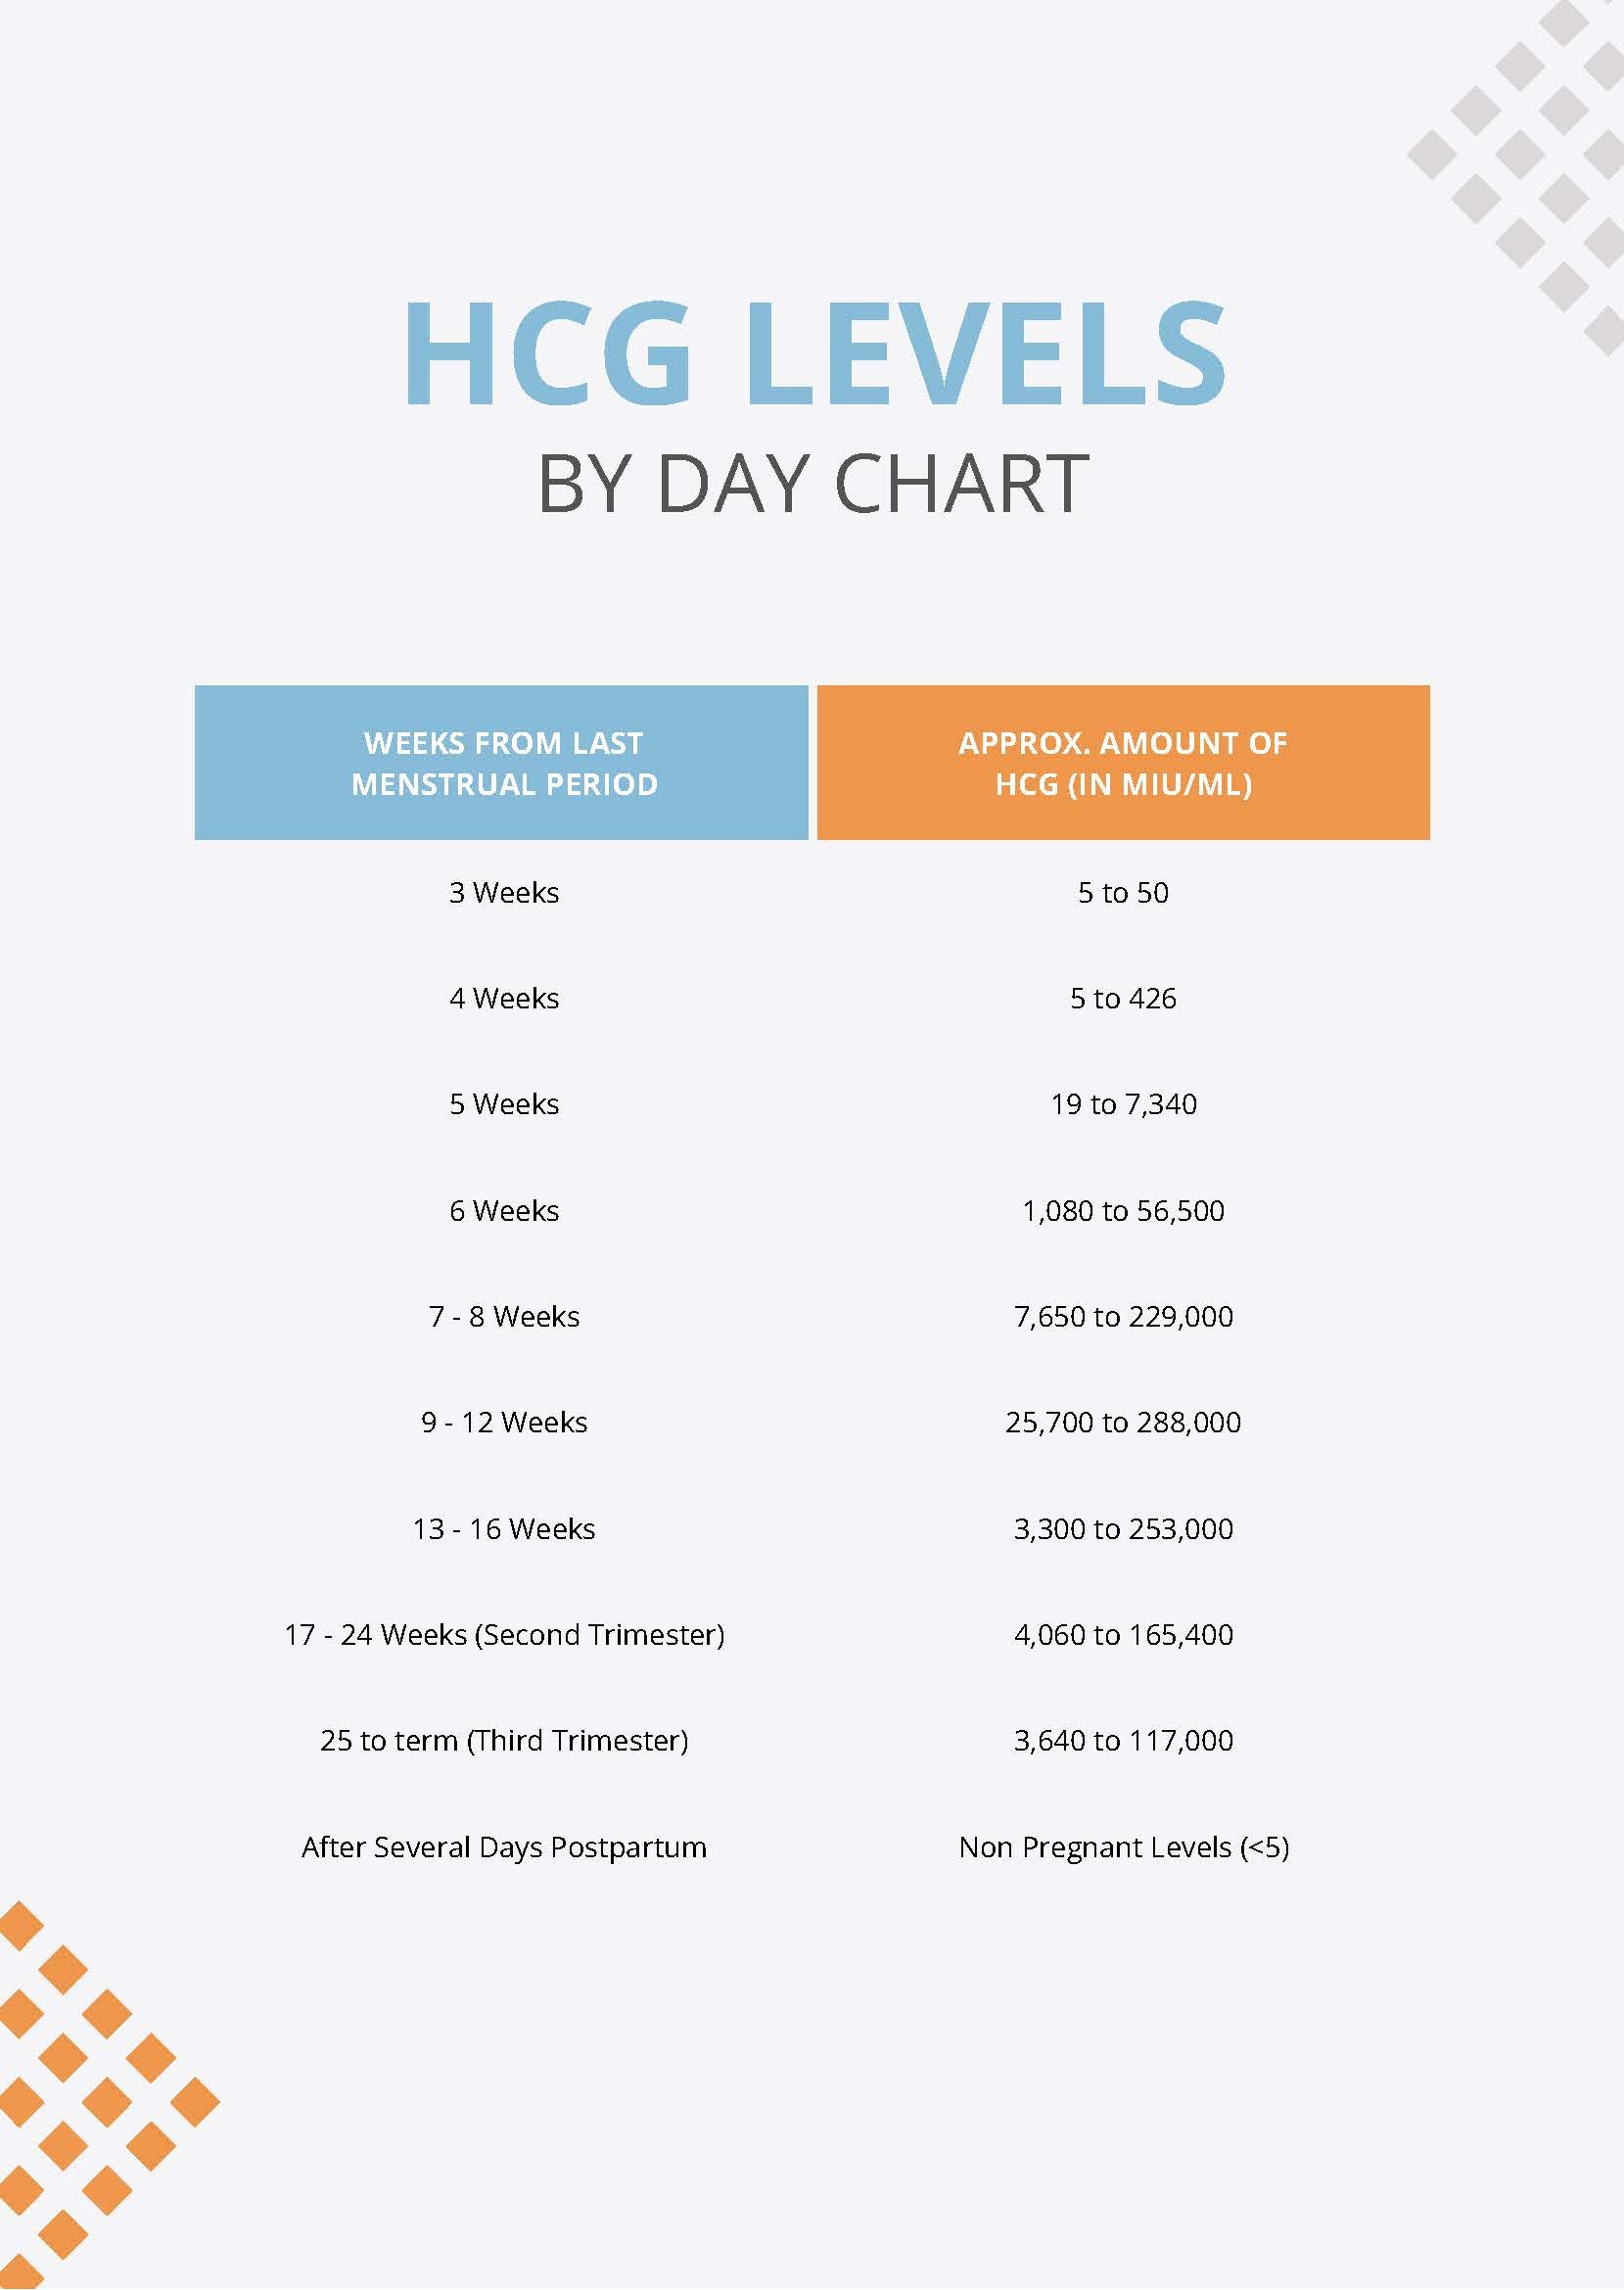 HCG Levels By Day Chart in PDF